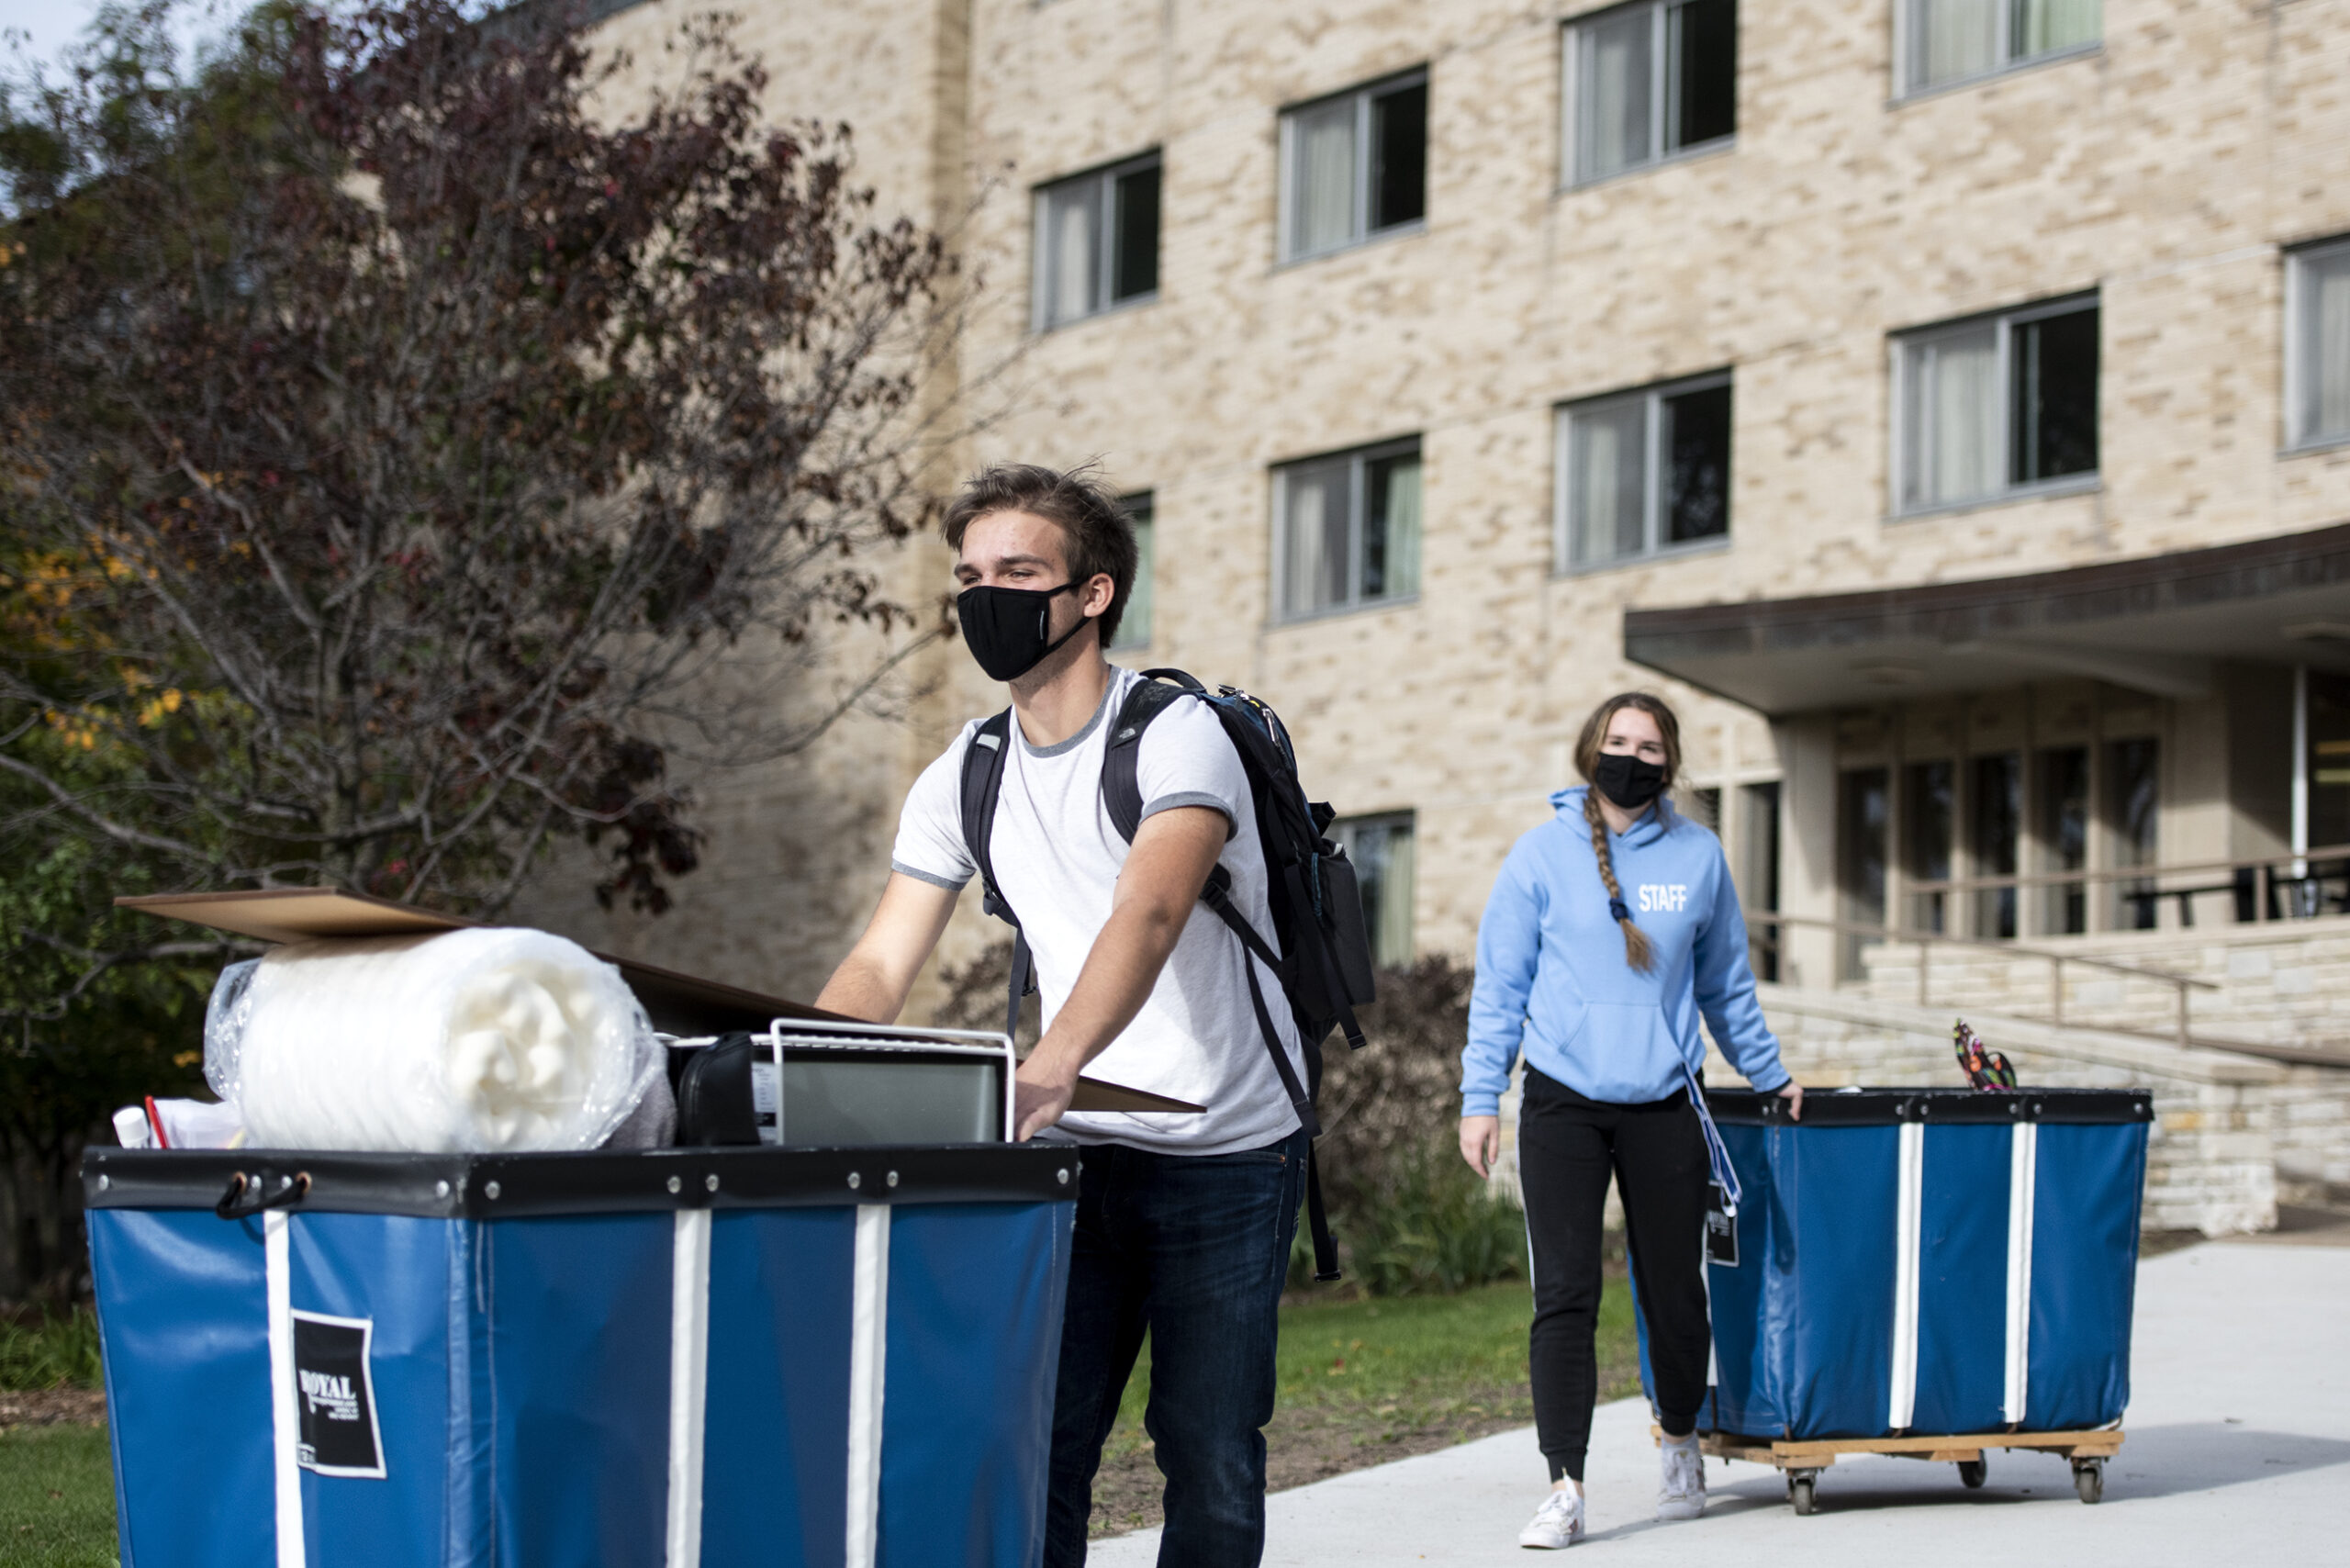 A student in a face mask rolls a blue bin filled with belongings